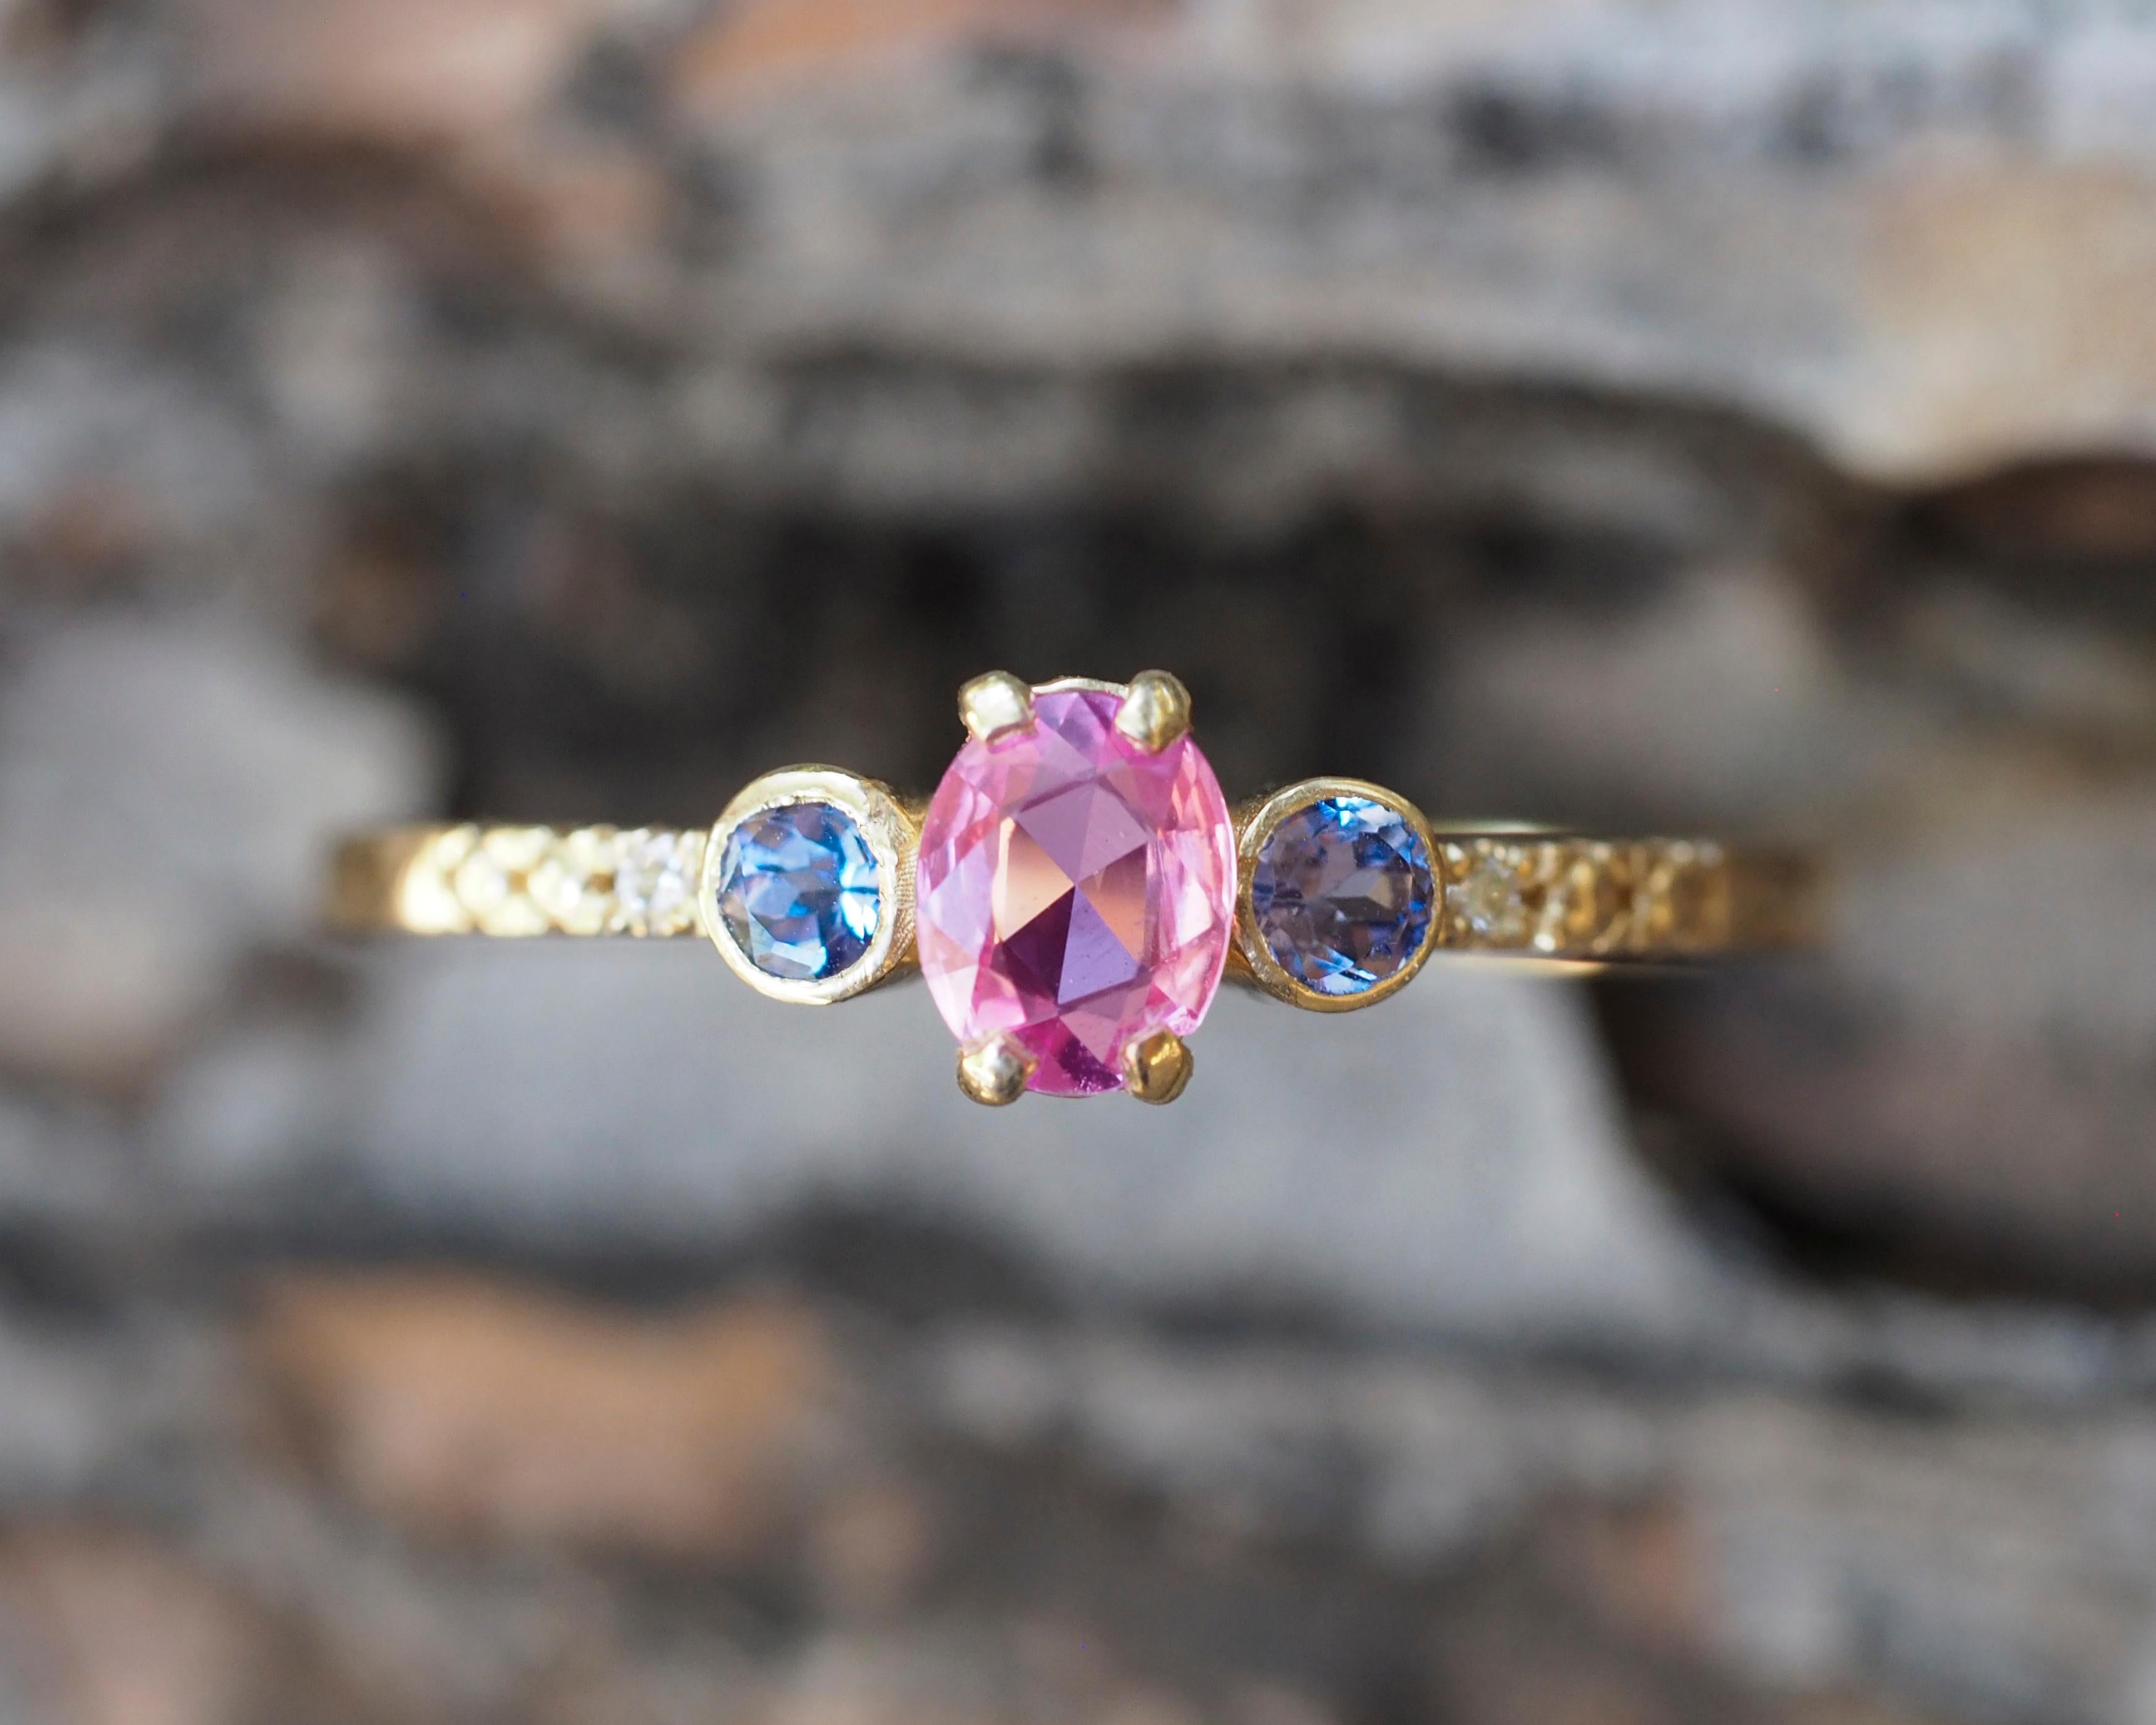 Pink sapphire 14k gold ring. 
Three gemstone ring. Tiny sapphire gold ring. Oval Sapphire ring. September birthstone ring.

Metal: 14k gold
Weight 1.65 gr. depends from size.

Gemstones:
Sapphire: oval shape, light pink, Si clarity, 1 piece 0.45